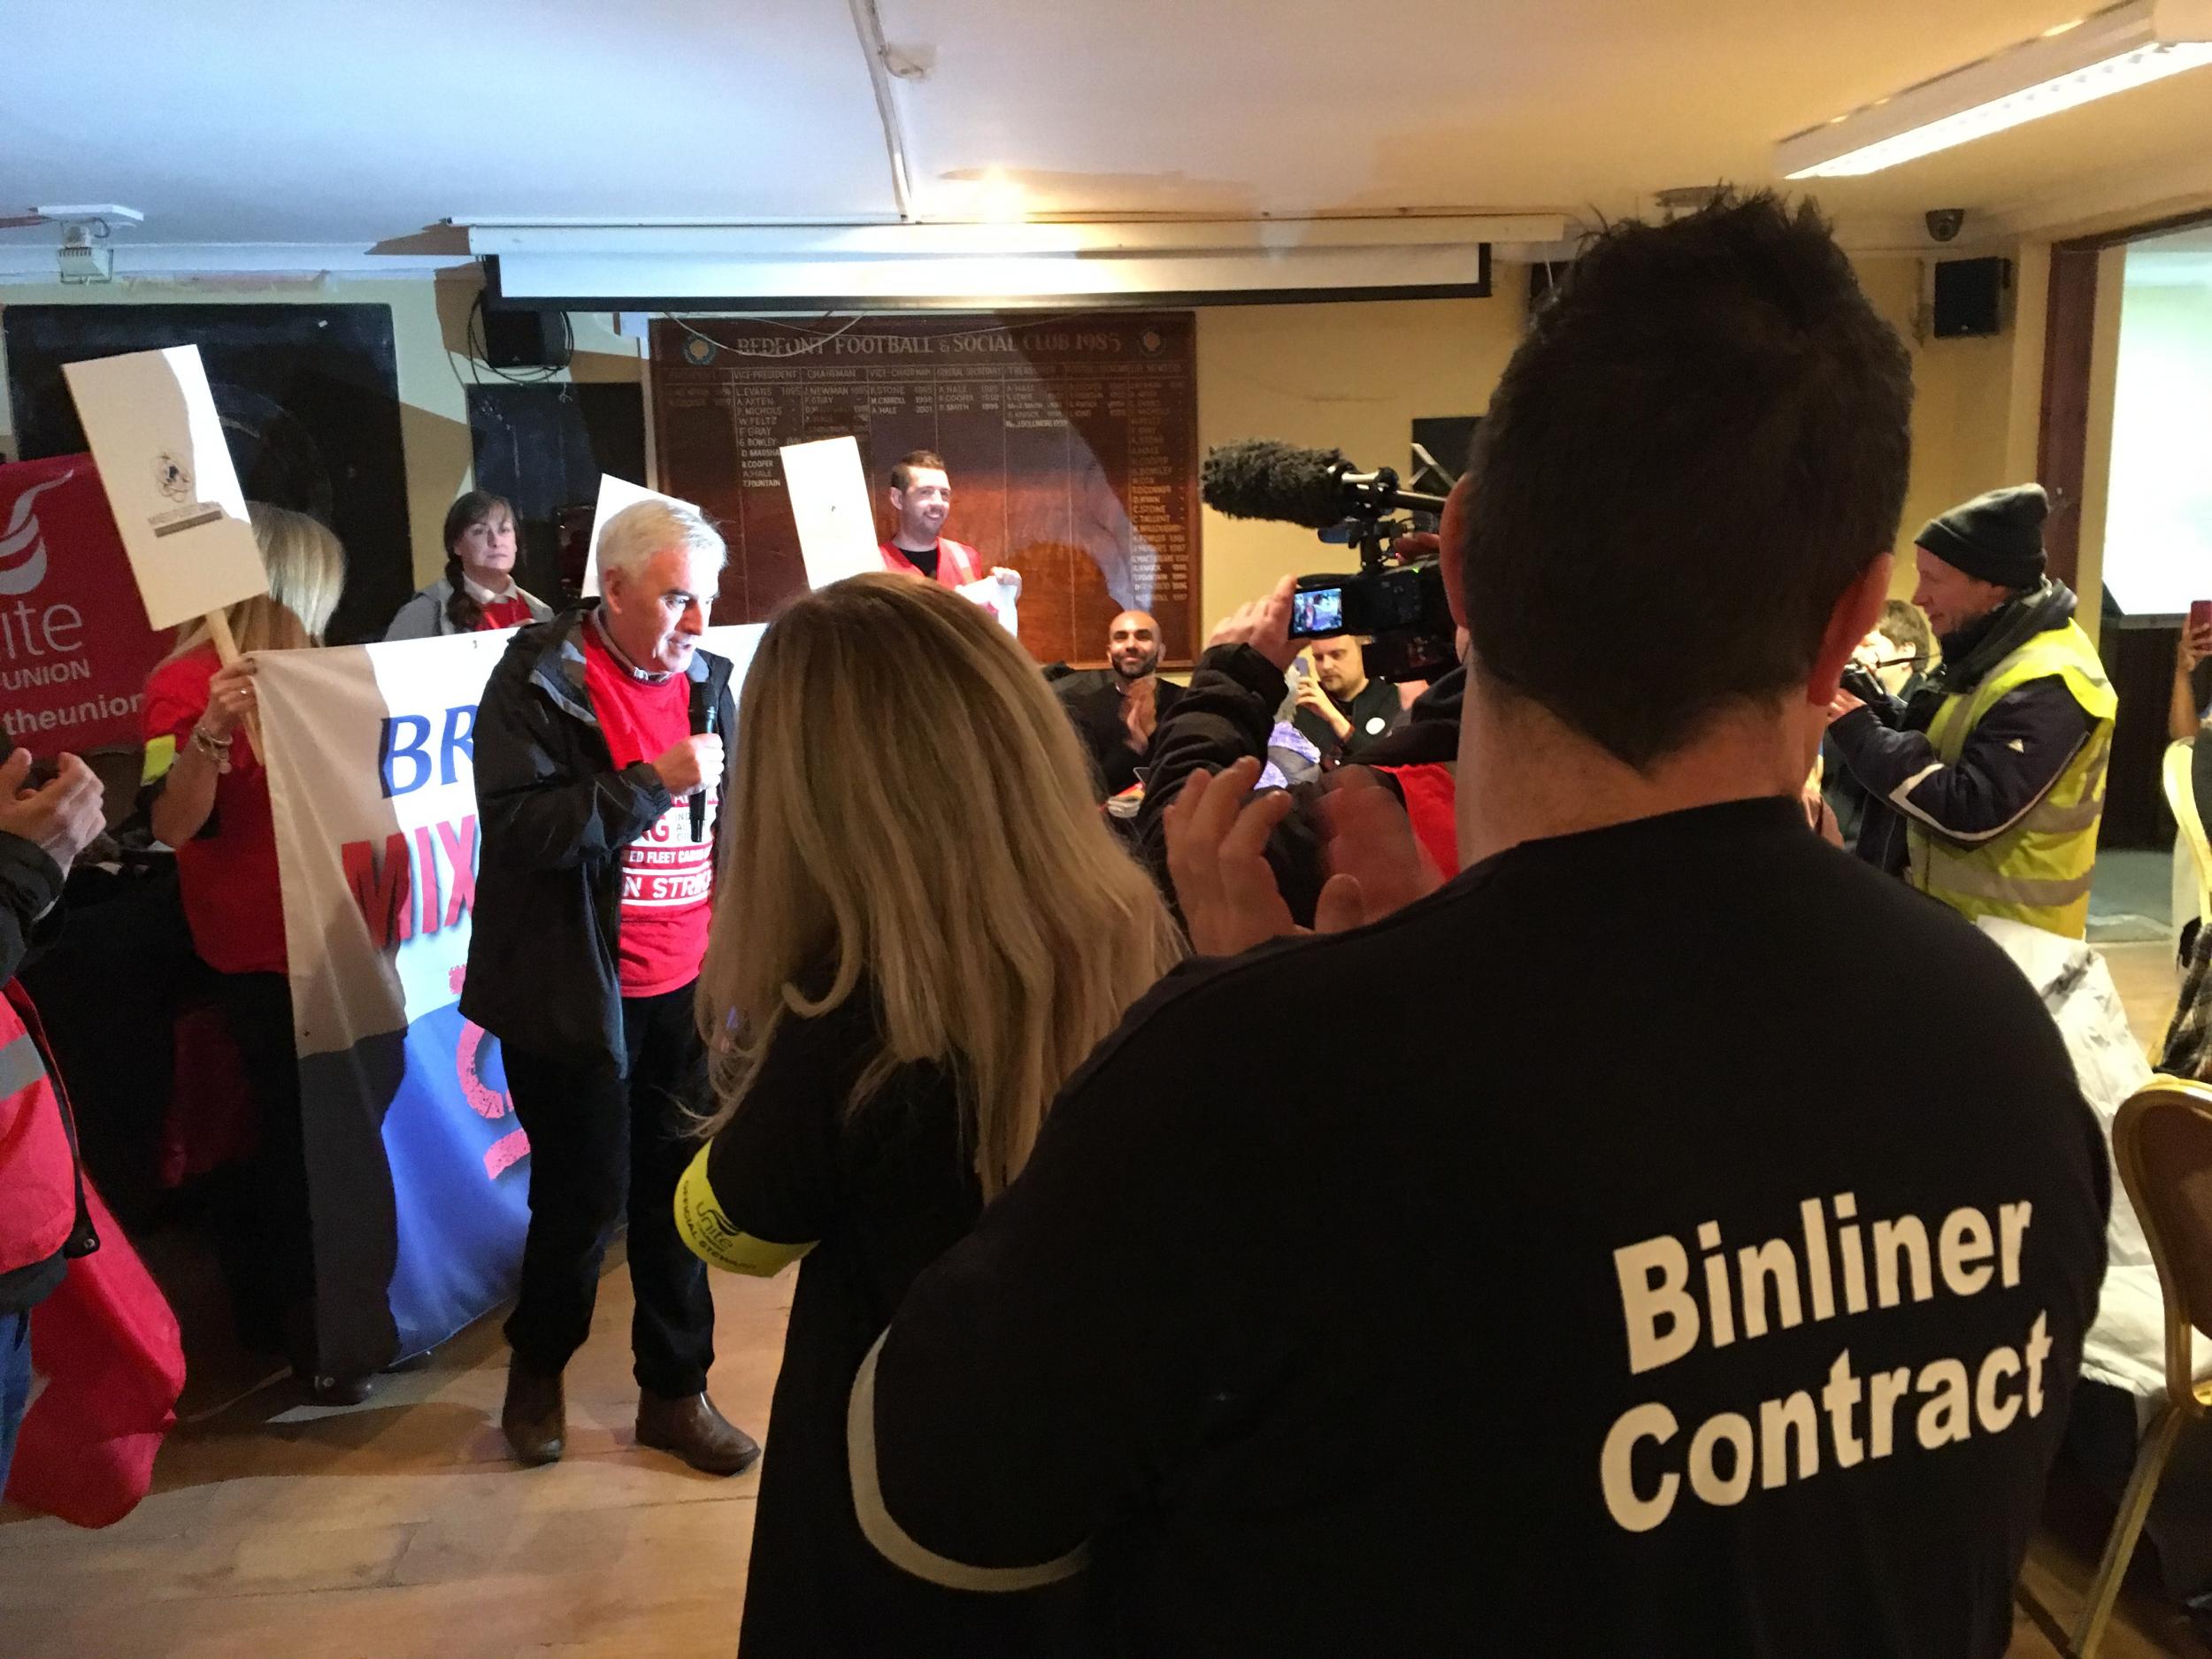 Flying picket: John McDonnell MP, shadow chancellor, addresses a rally of striking BA cabin crew